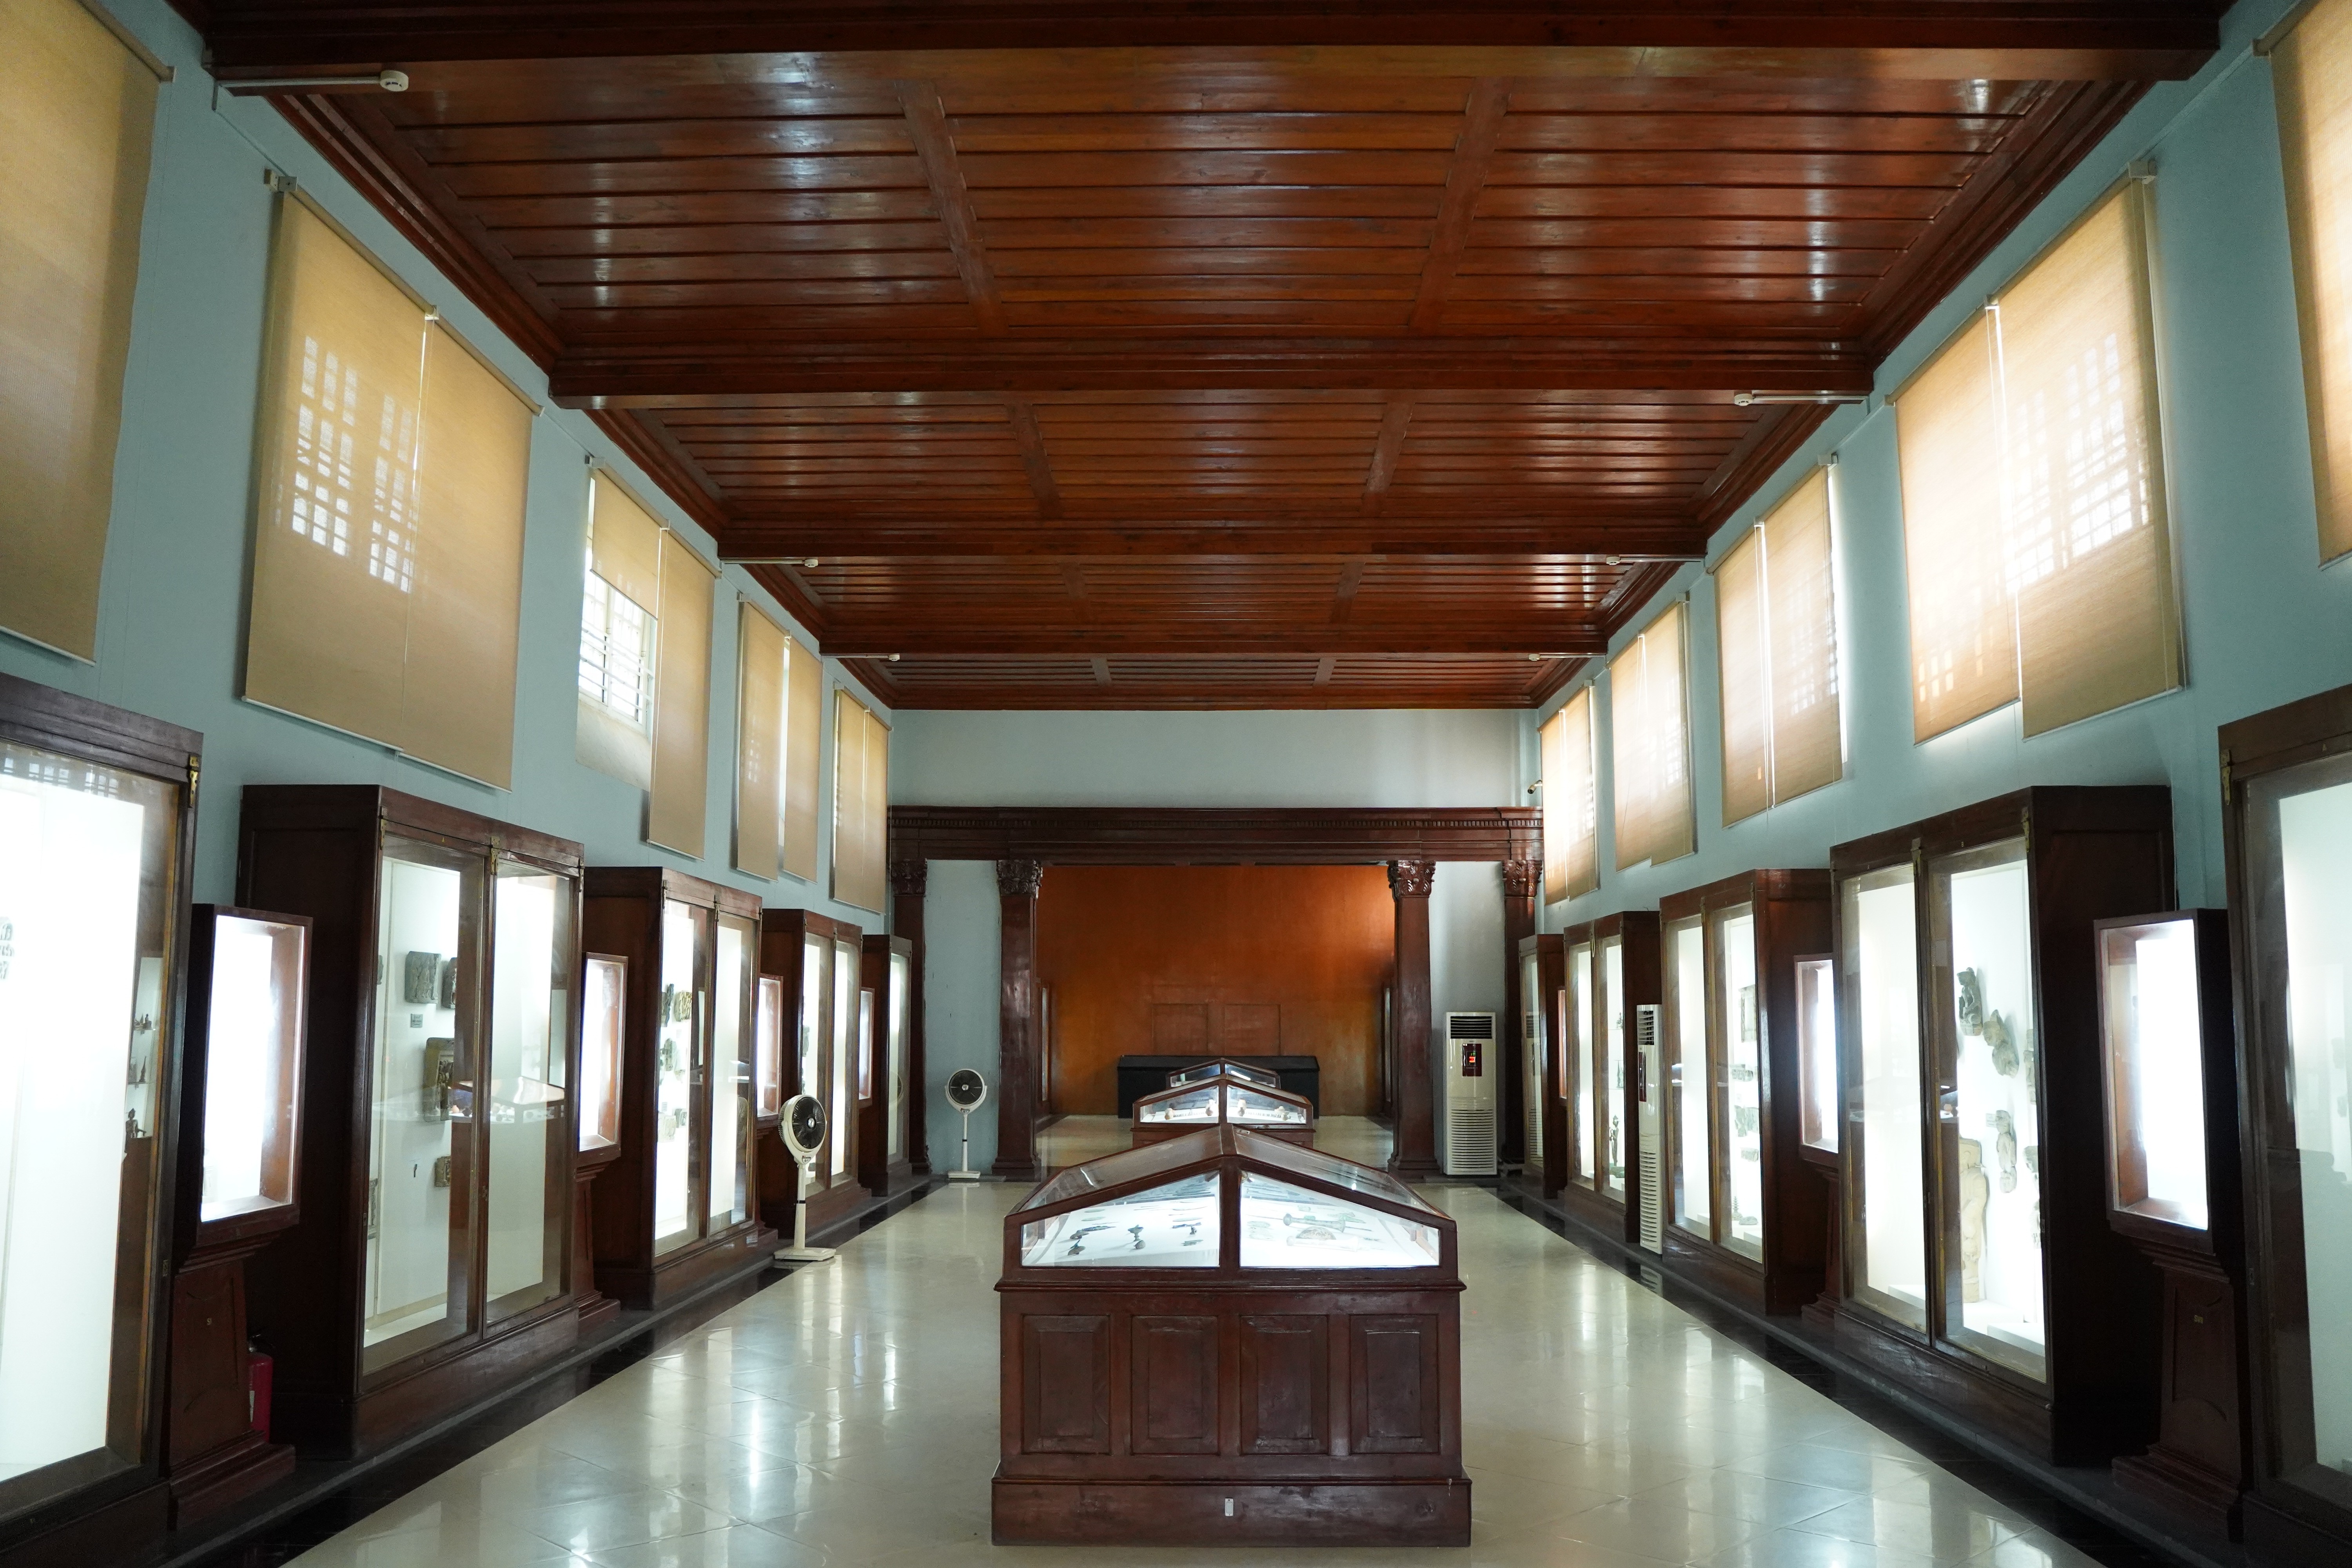 The inside view of Taxila Museum